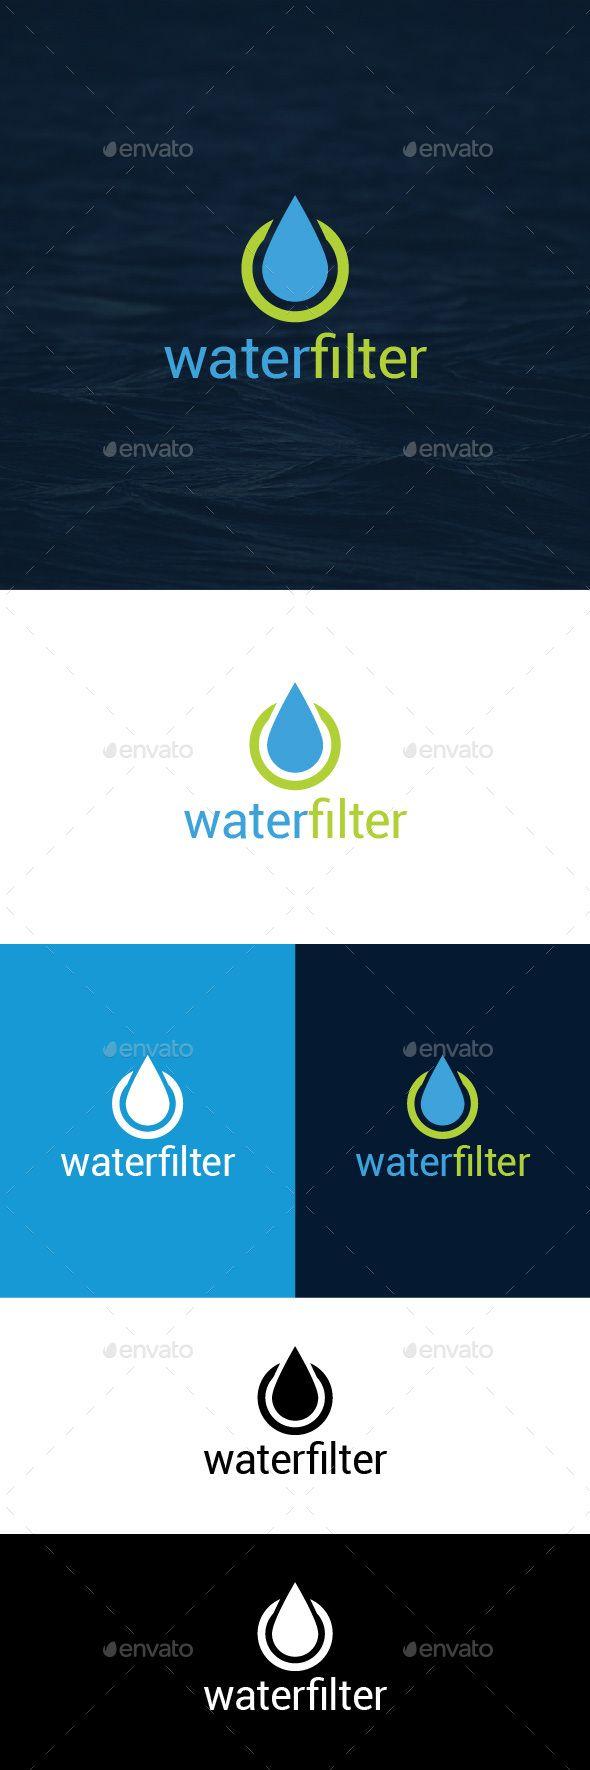 Filter Logo - Filter Logo Templates from GraphicRiver